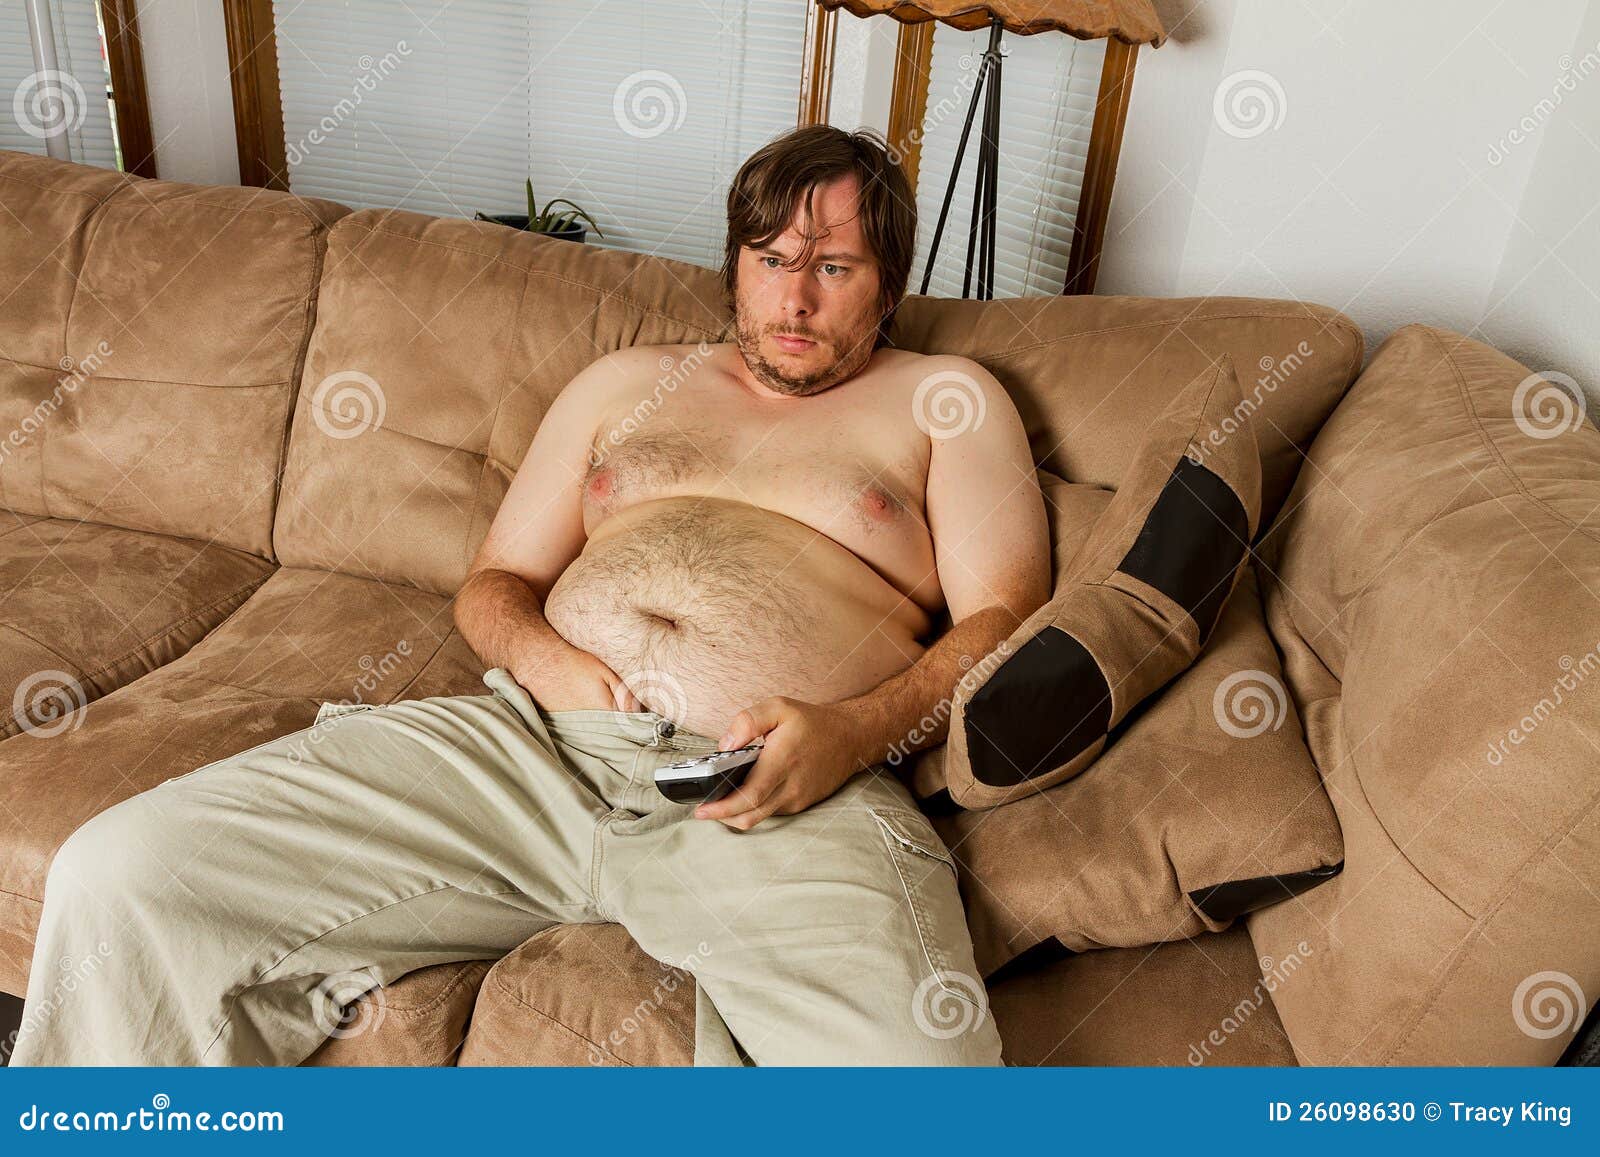 bruno rosas recommends fat guy on couch pic